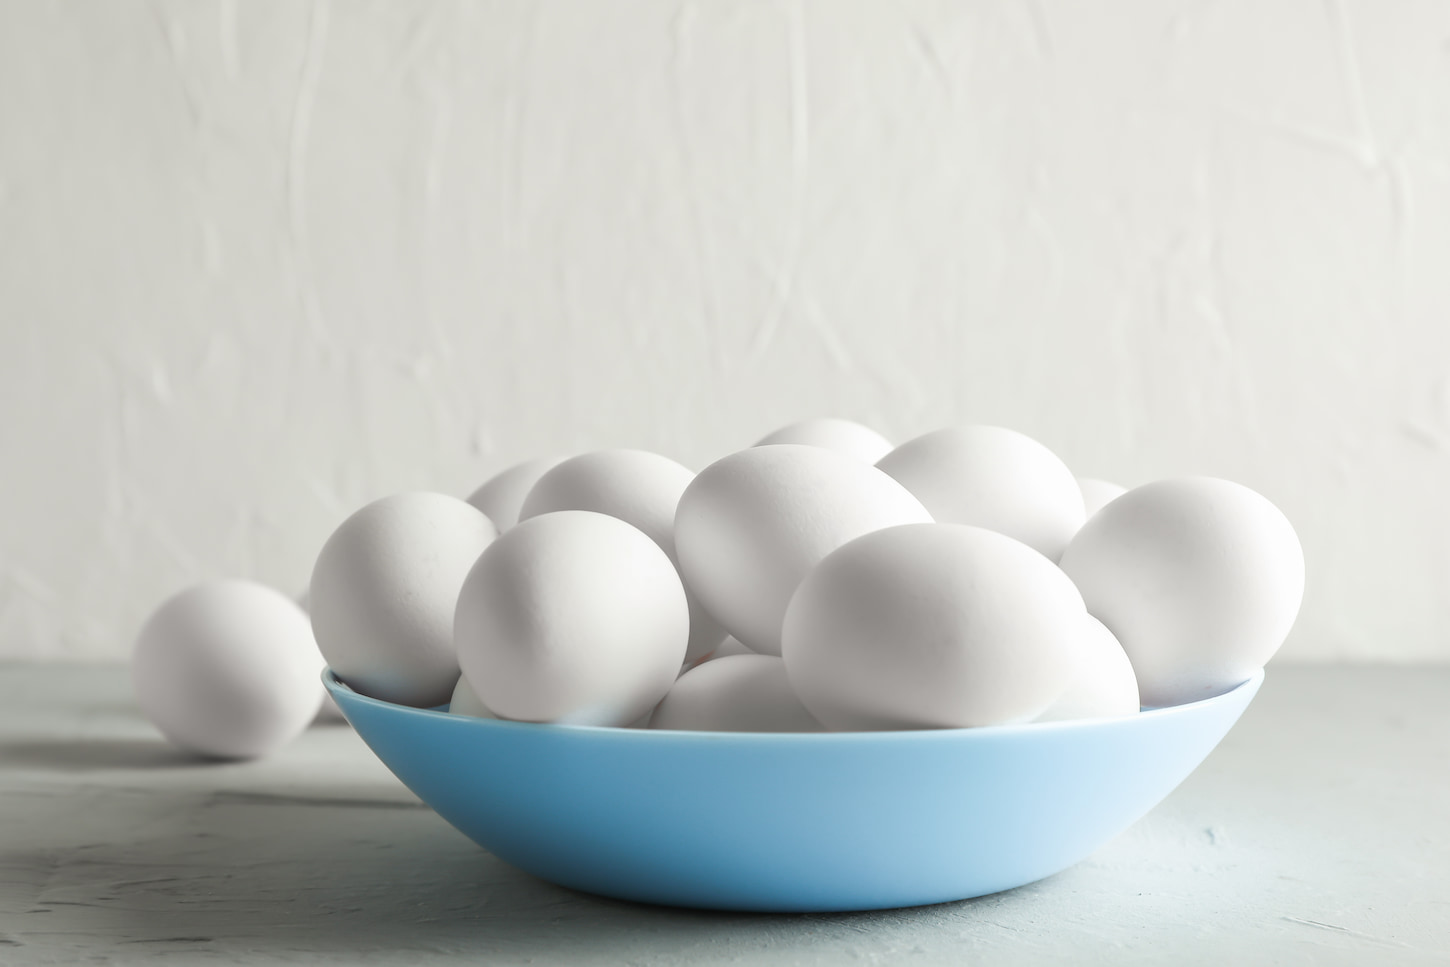 An image of Chicken eggs on a plate on the gray table against a white background.